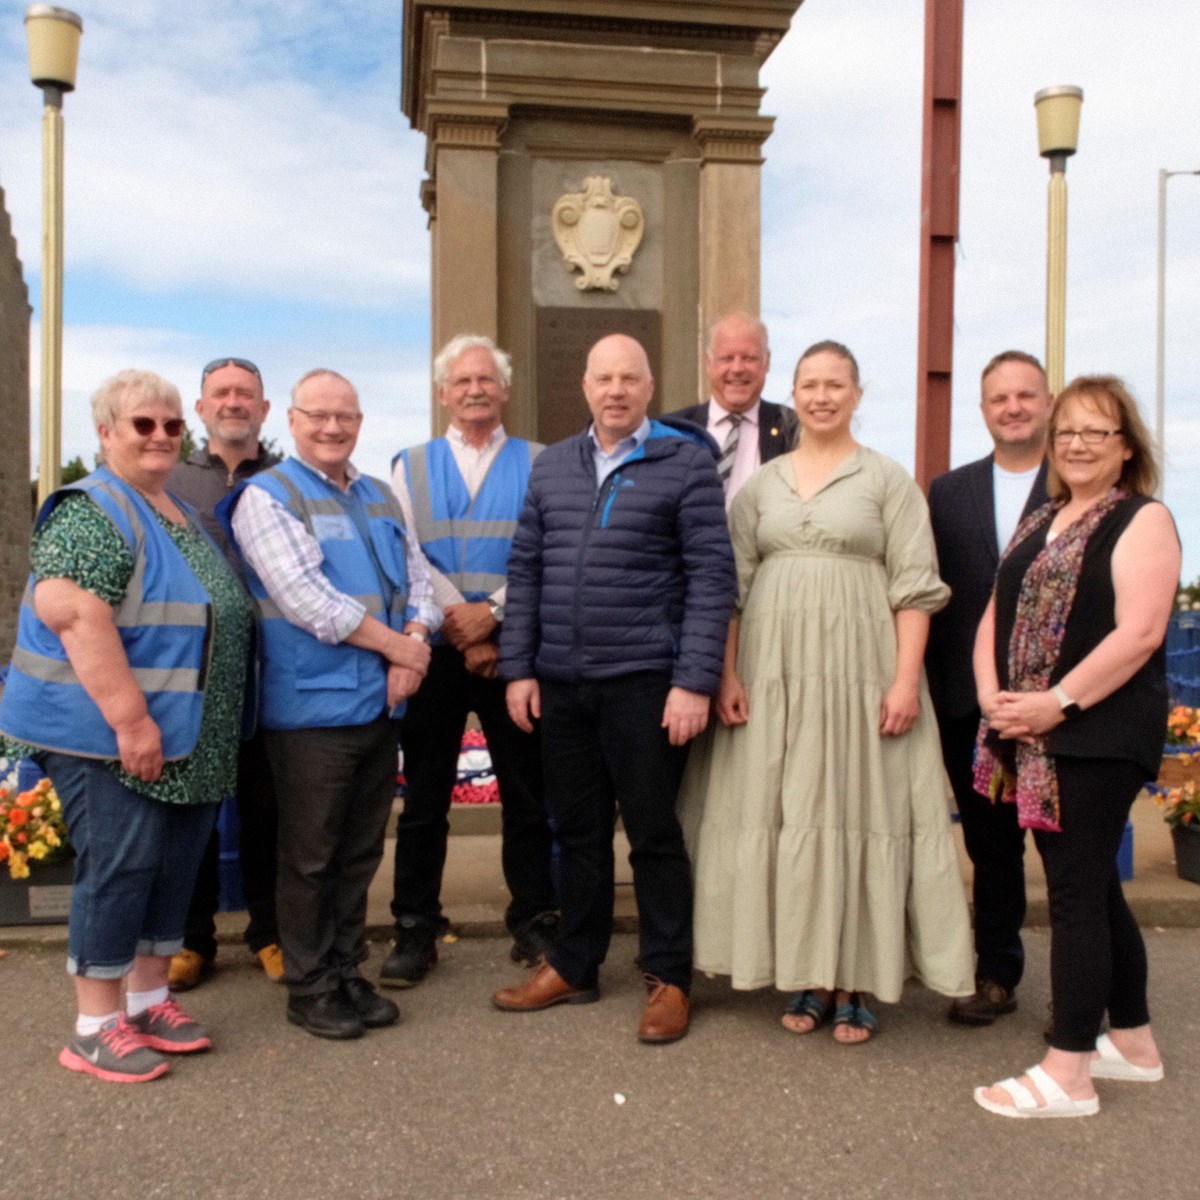 (From left to right) Buckie’s Roots Chairperson, Meg Jamieson, Moray Council’s Structural Maintenance Assistant Jez Allum,  Buckie’s Roots Treasurer, Gifford Leslie, and fellow member, Archie Jamieson, Moray Council’s Open Spaces Manager, James Hunter, Buckie Councillor, Neil McLennan, Karolina Alla